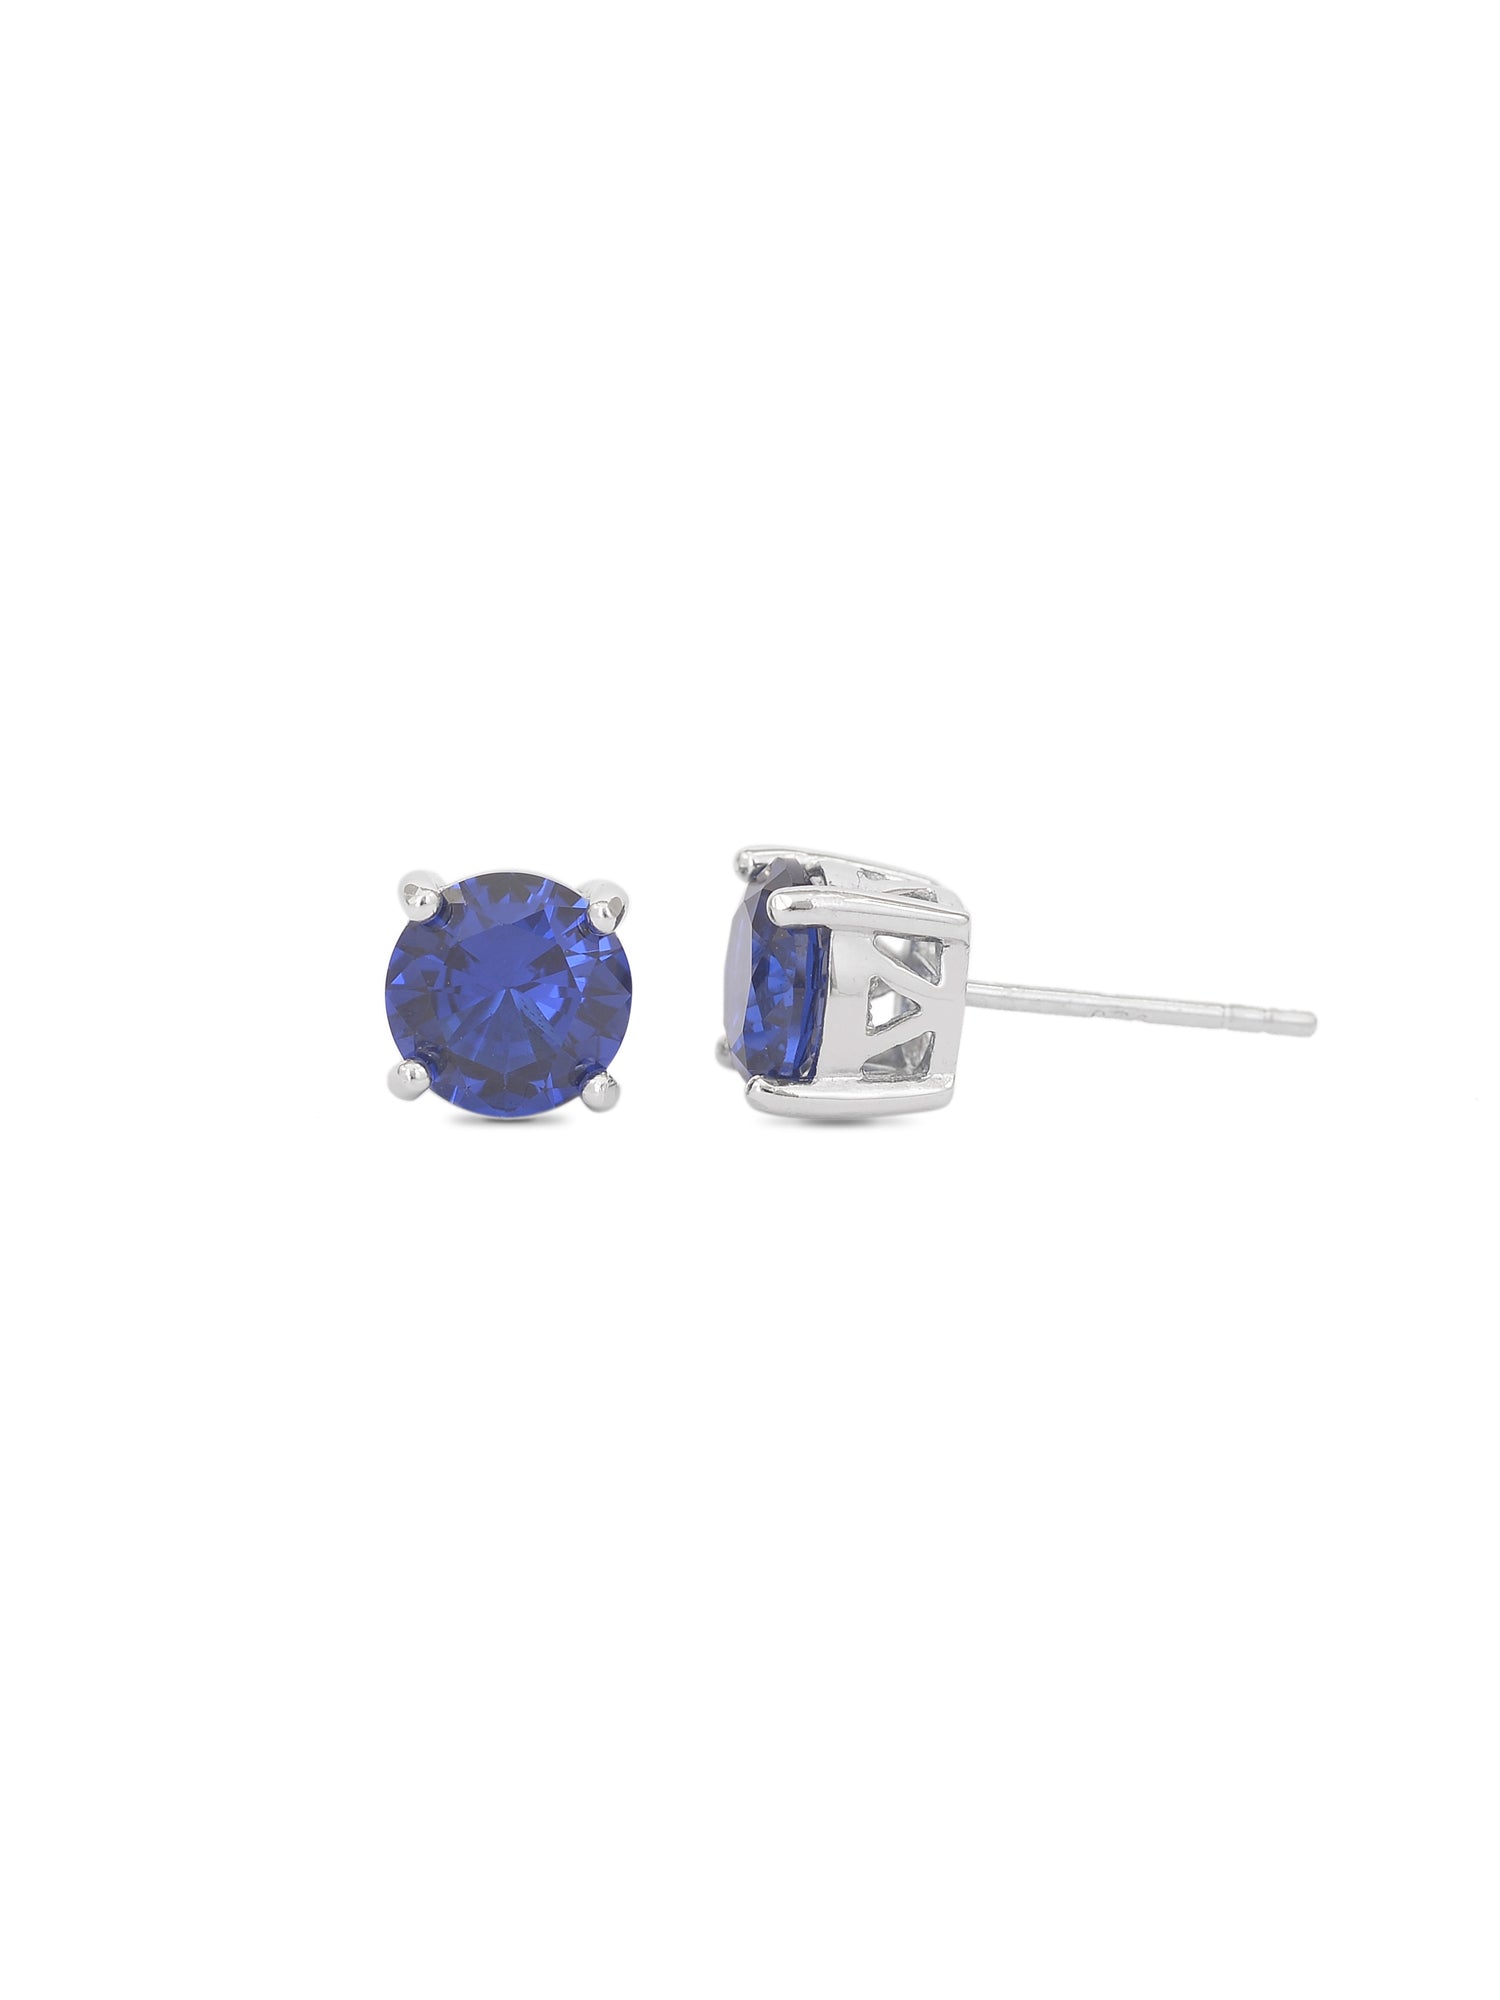 BLUE SAPPHIRE DAILY WEAR SOLITAIRE STUDS IN STERLING SILVER-4